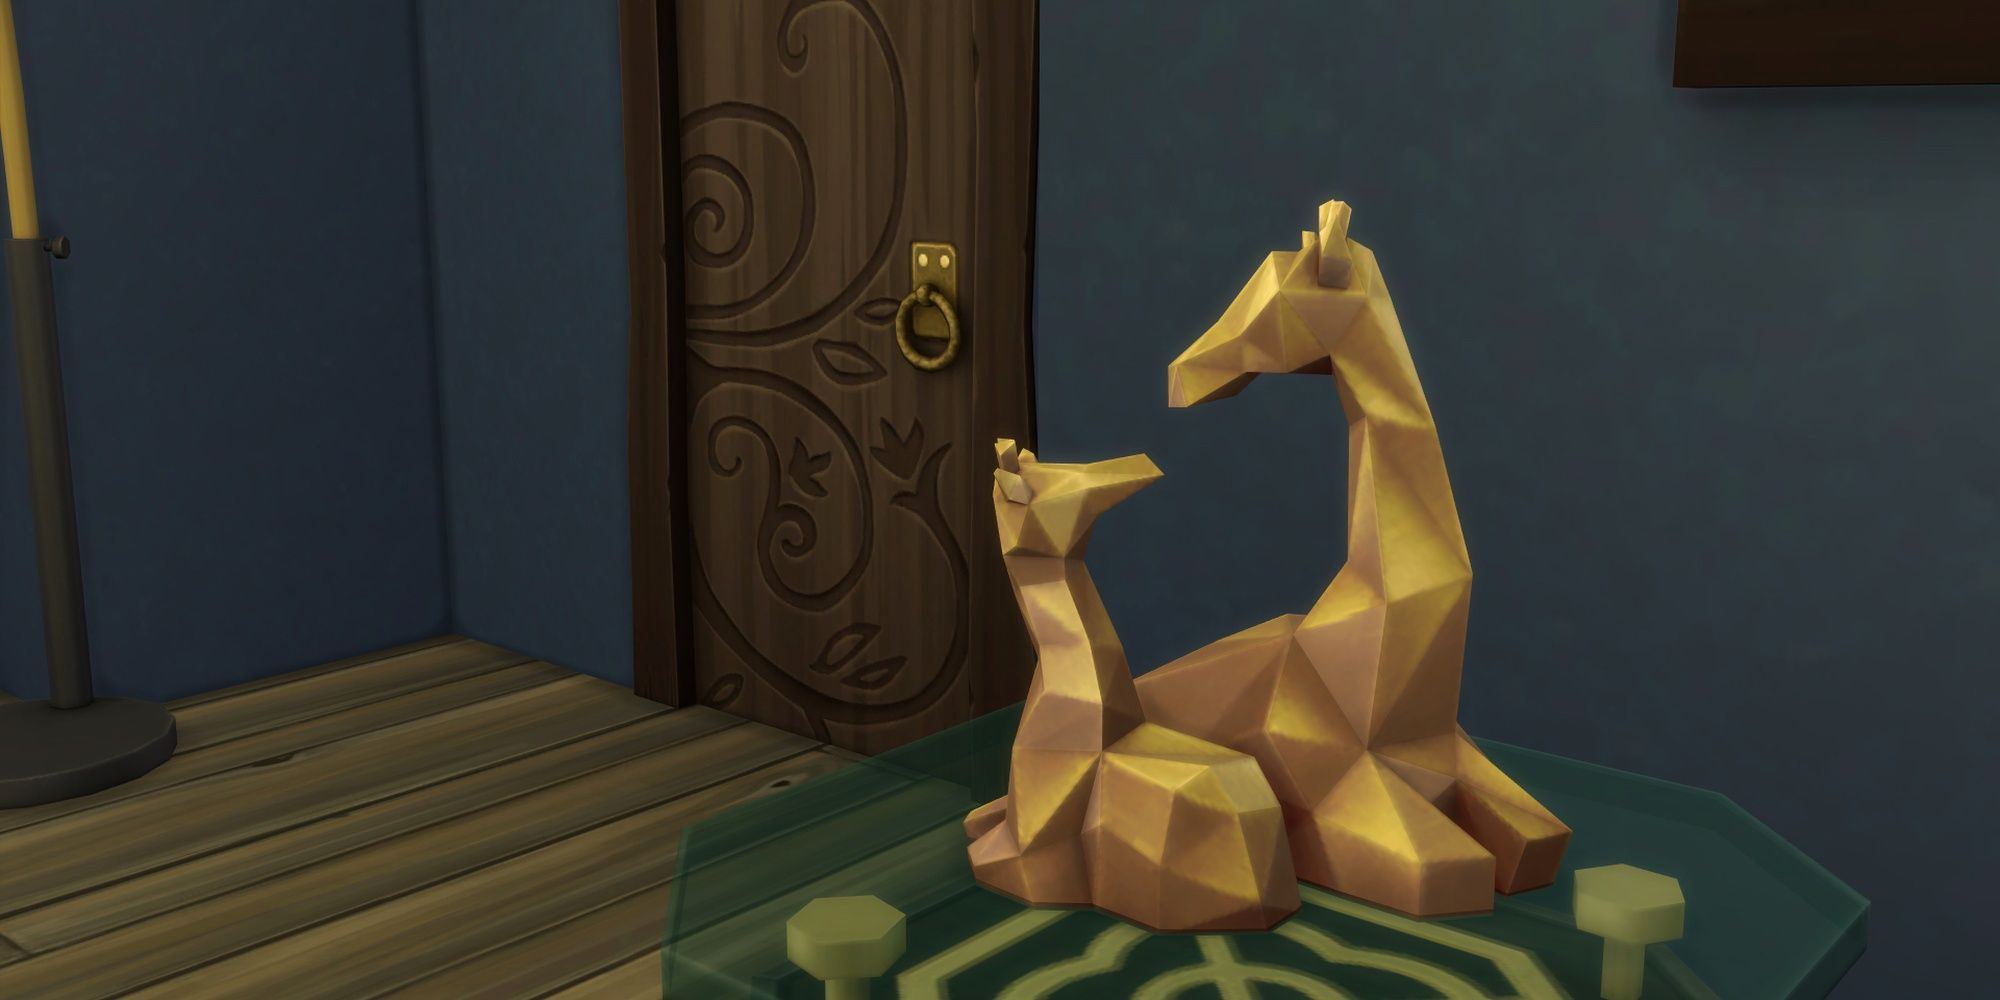 Small geometric giraffe sculpture from The Sims 4: Decor to the Max